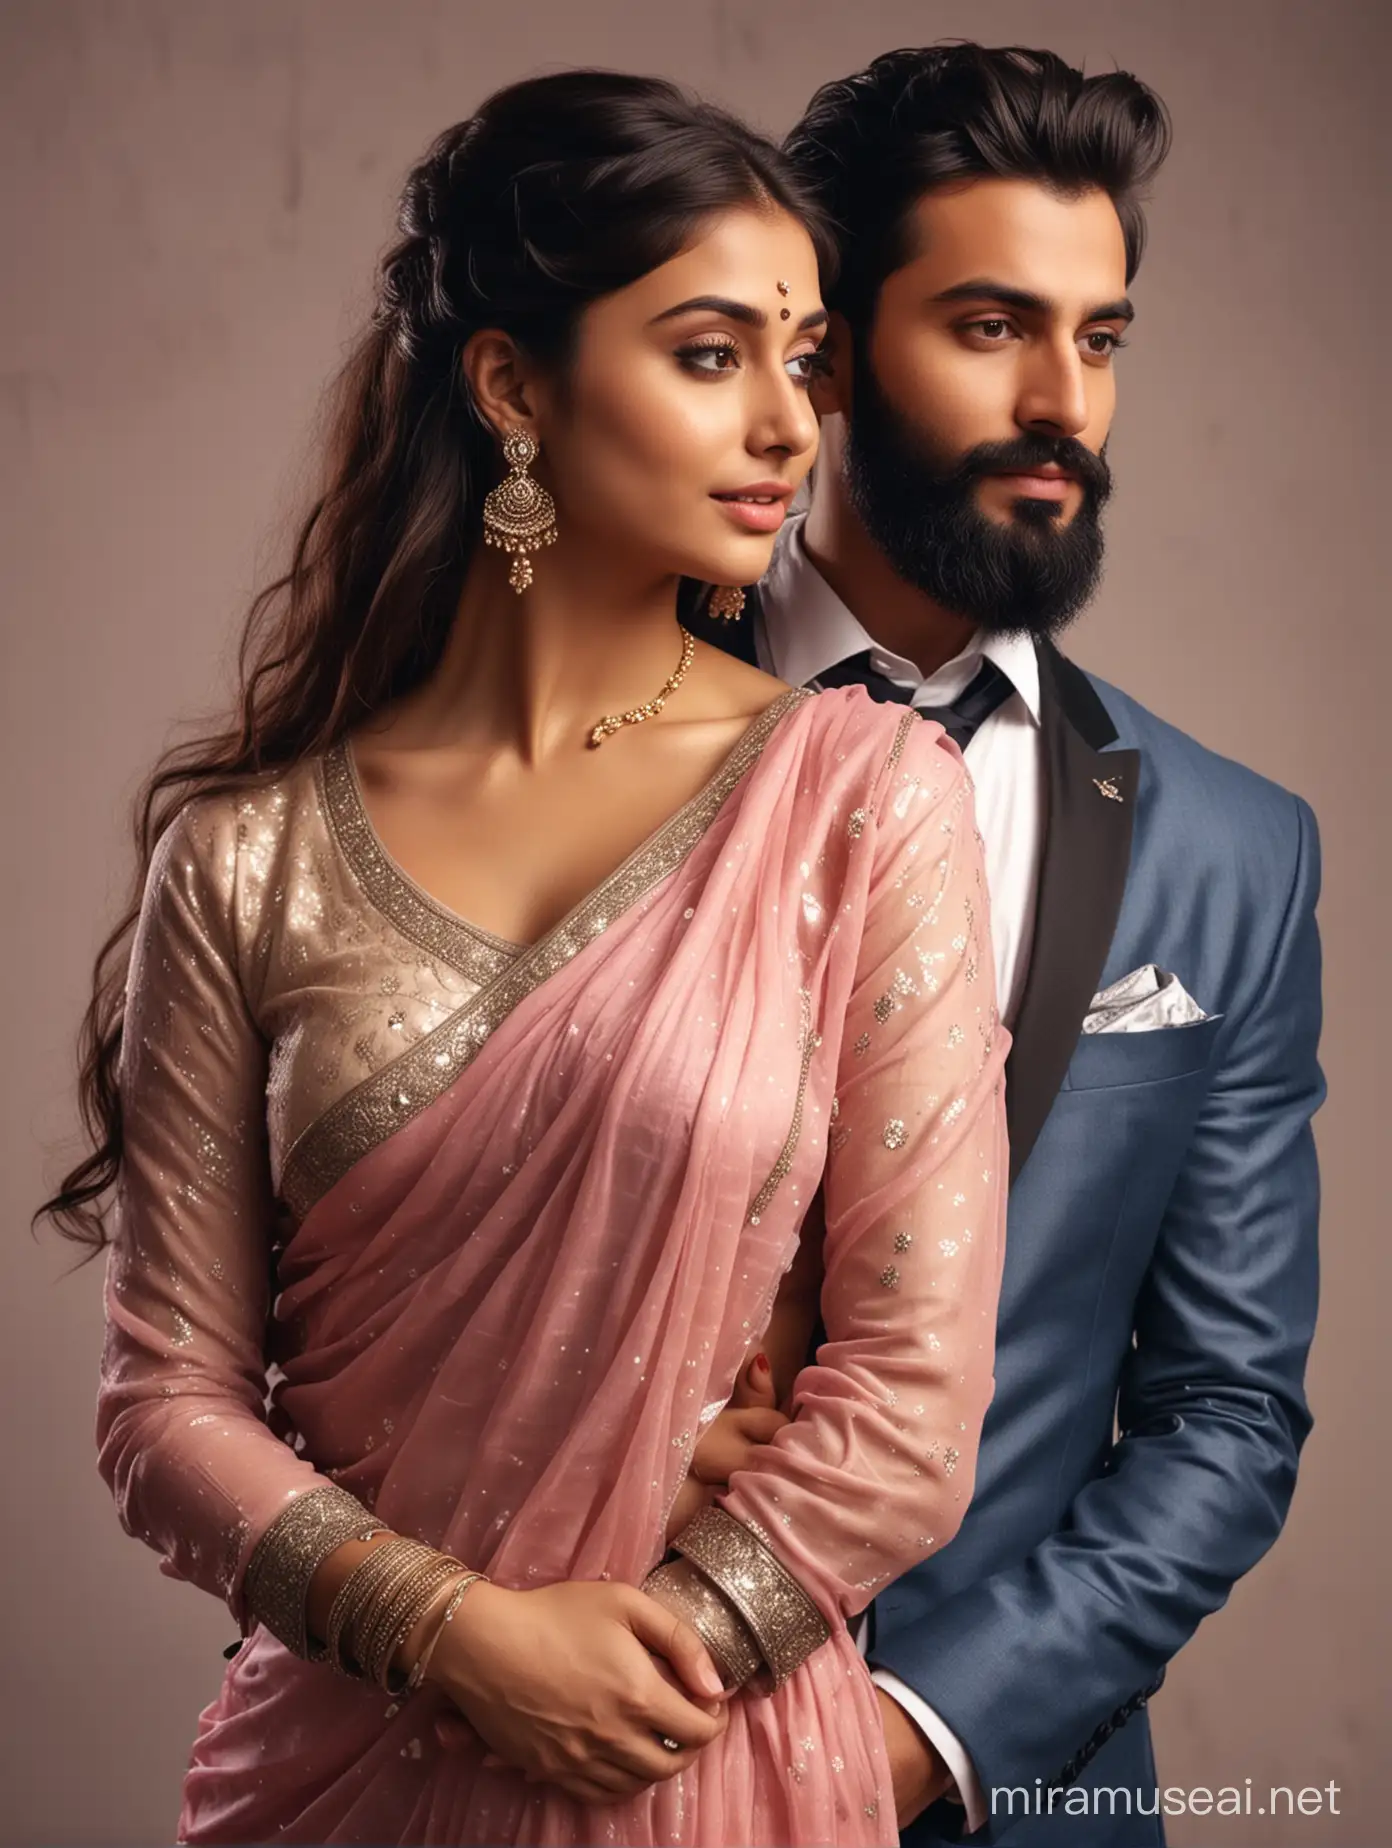 full portrait photo of most beautiful european couple as most beautiful indian couple, most beautiful girl in saree, full makeup, embracing  man from back side, . girl holding man from back, girl holding man from back  with emotional attachment and ecstasy, man with stylish beard and in formals and tie, photo realistic, 4k.